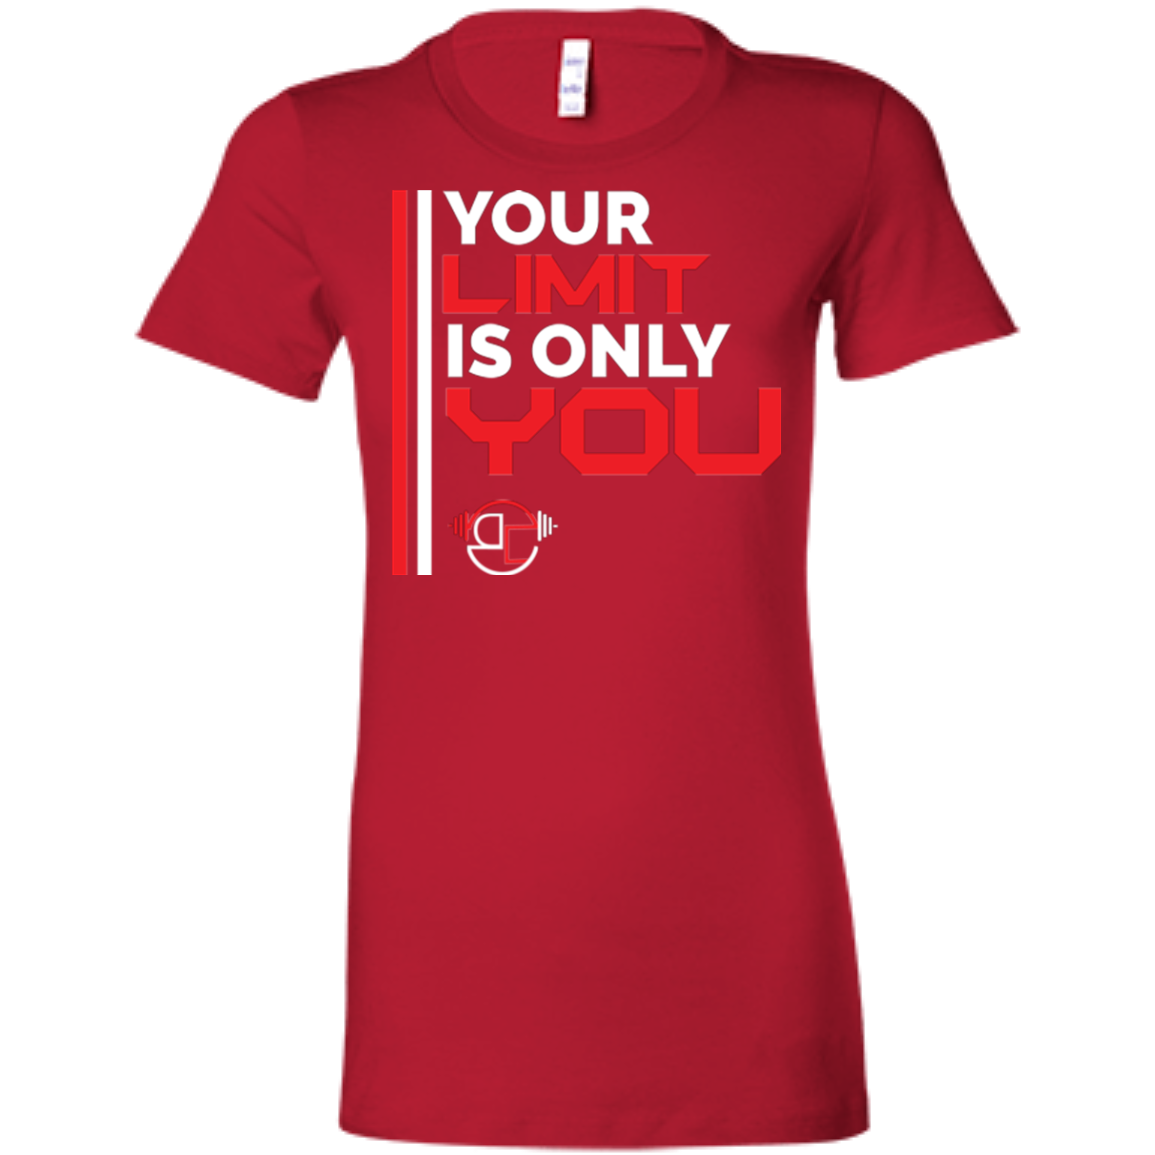 Limit is Only You Ladies' Favorite T-Shirt